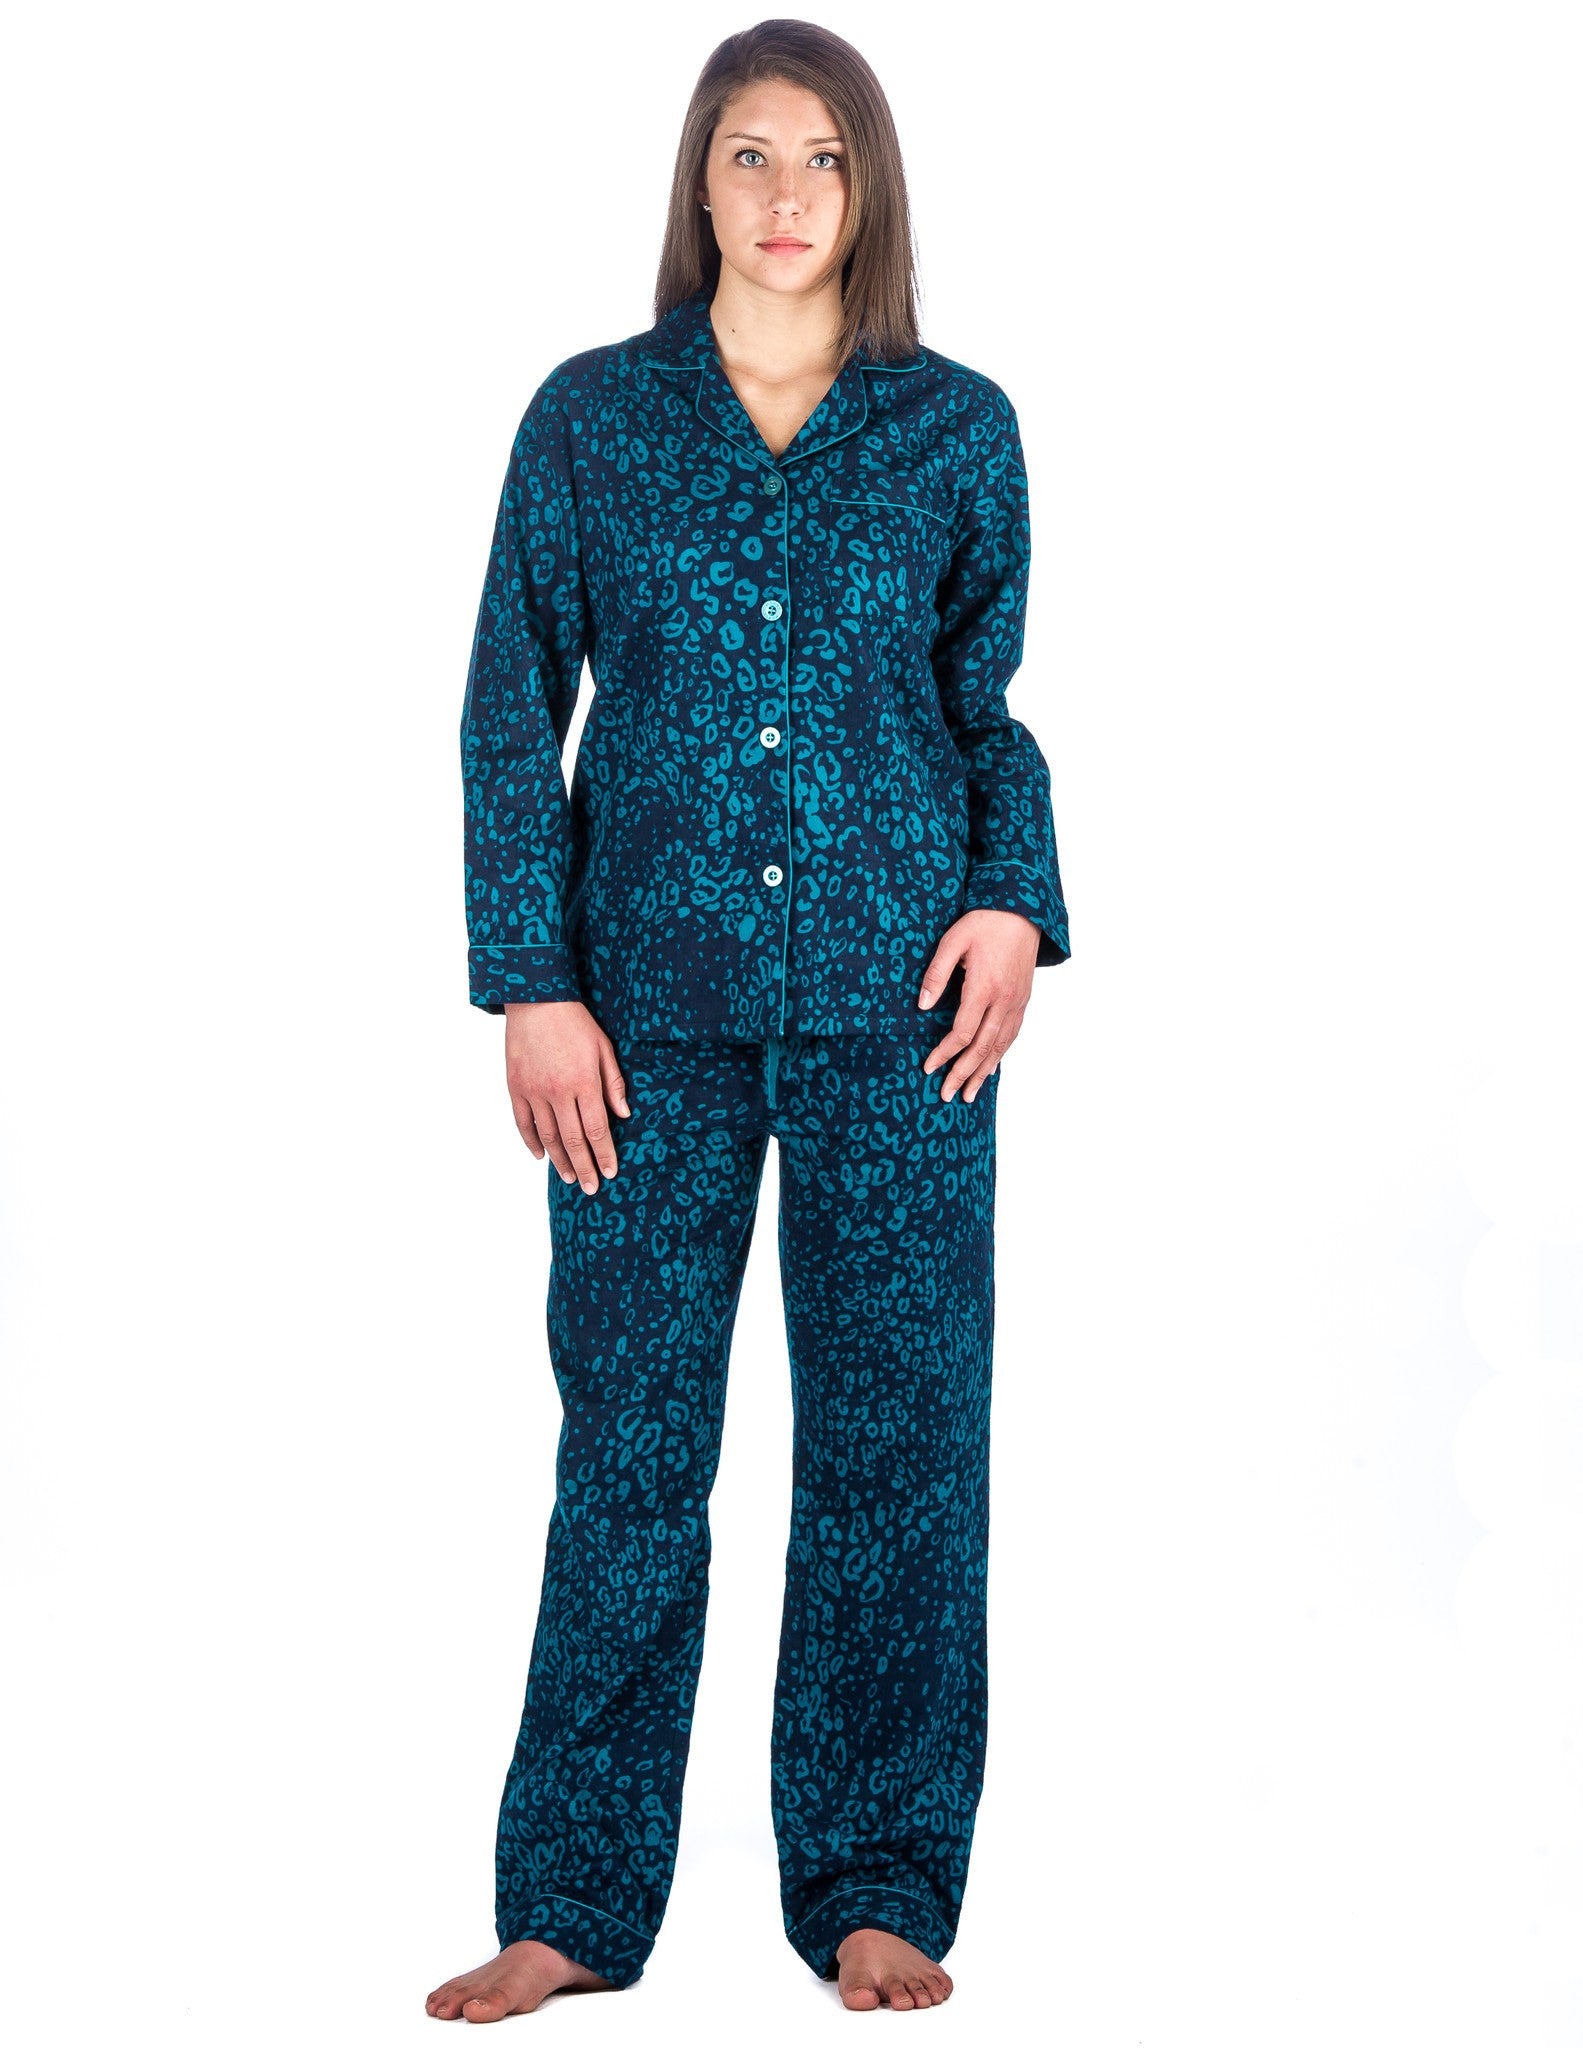 Womens 100 Cotton Flannel Pajama Sleepwear Set Relaxed Fit Noble Mount 9247